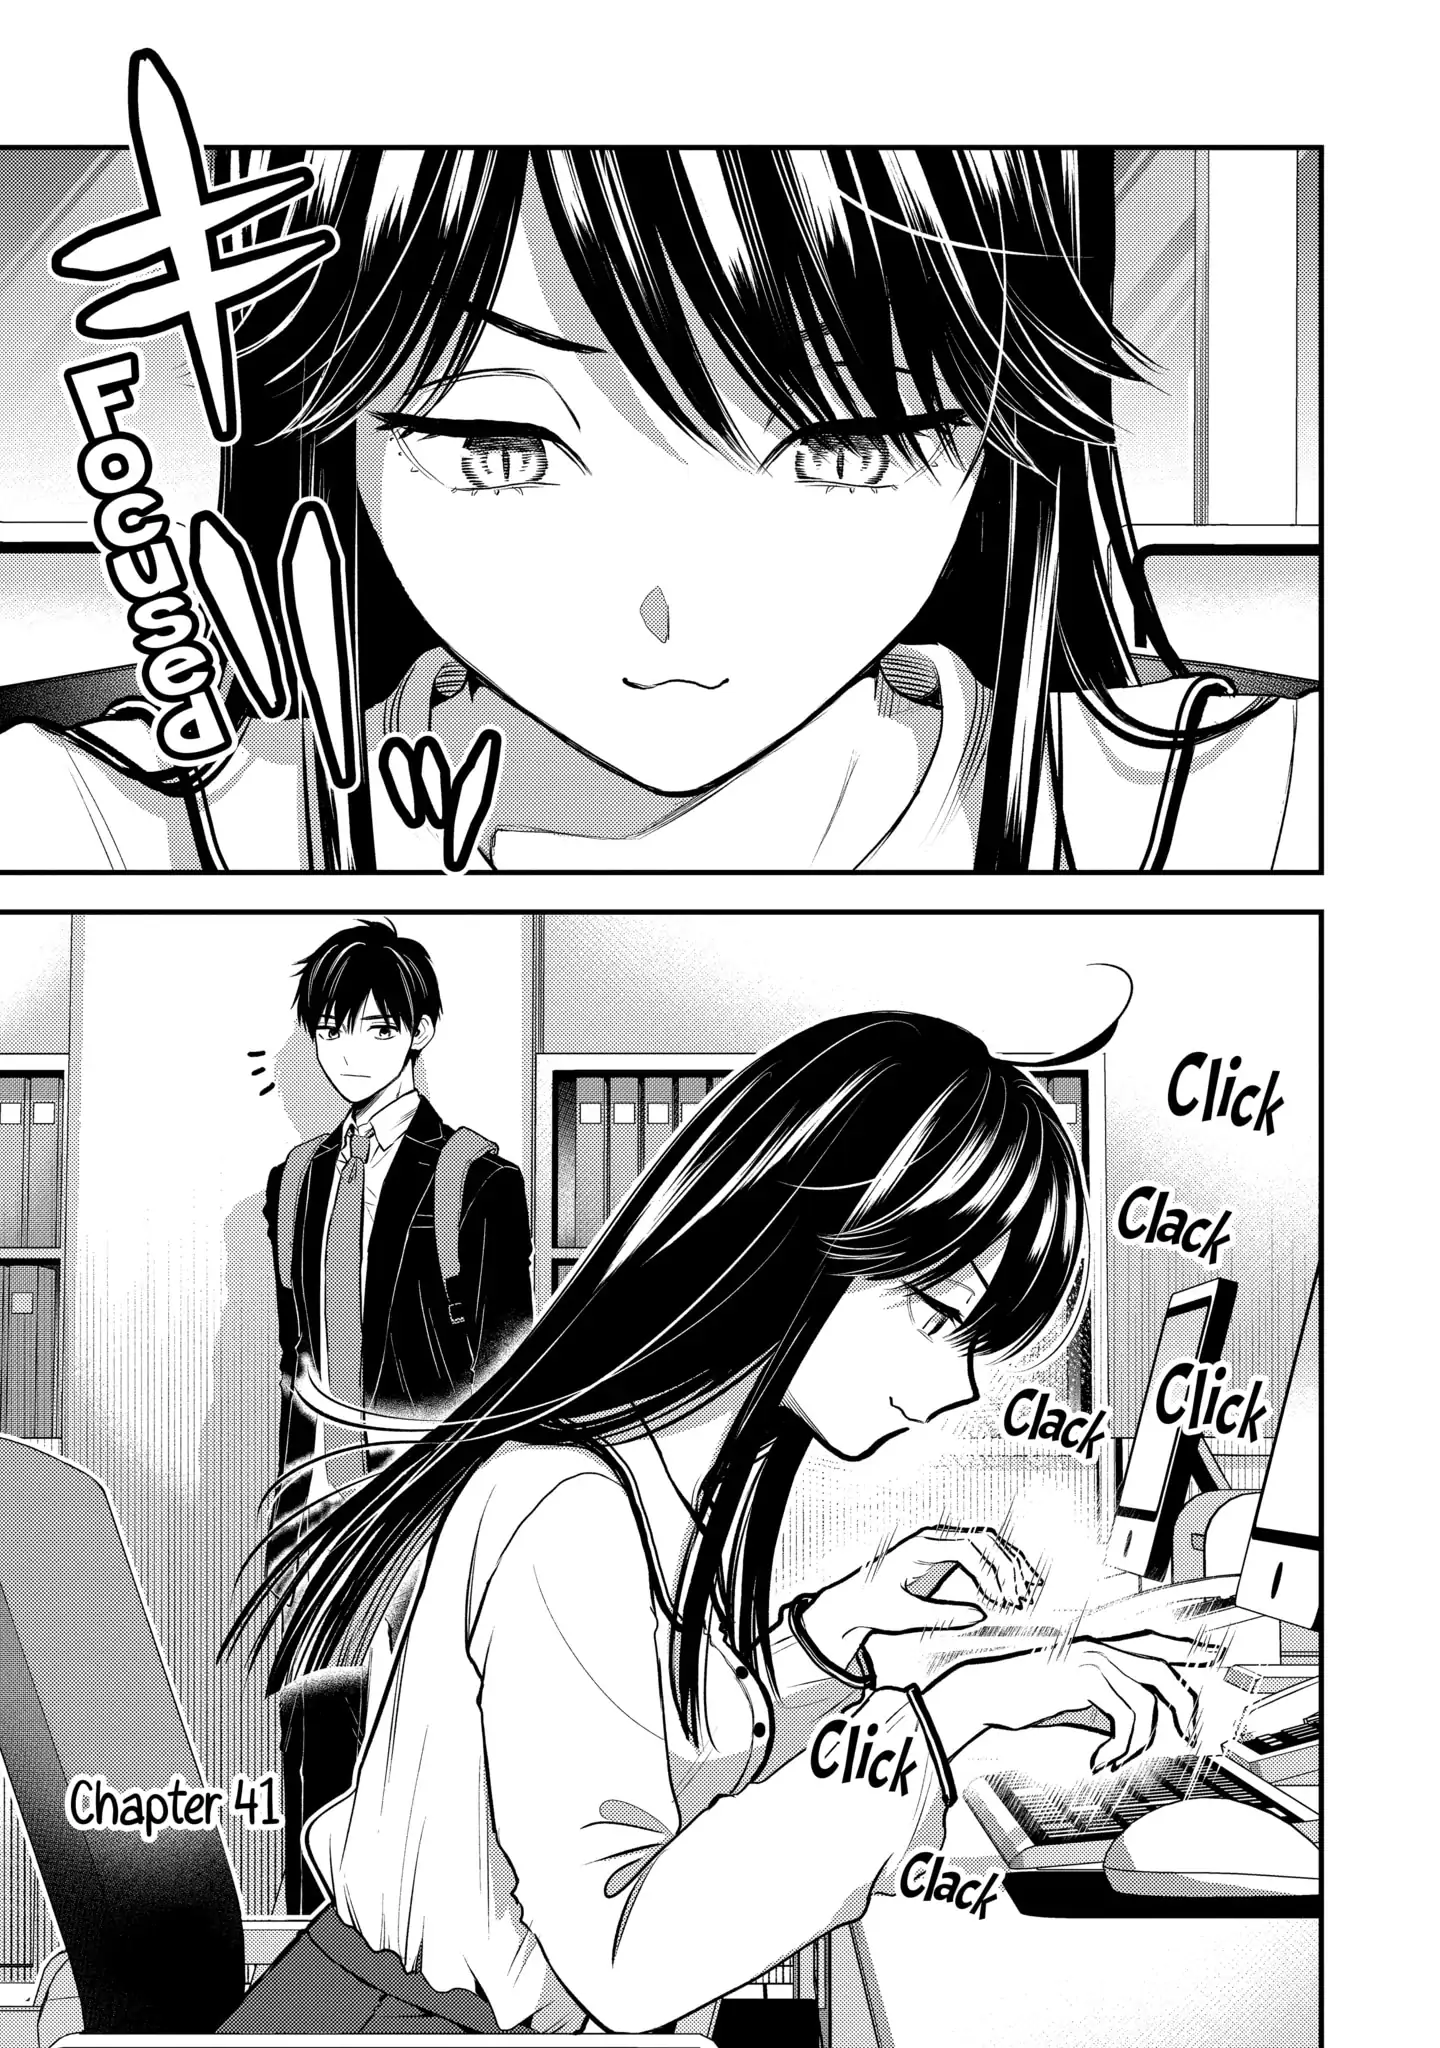 Ice Guy and the Cool Female Colleague - chapter 41.1 - #1